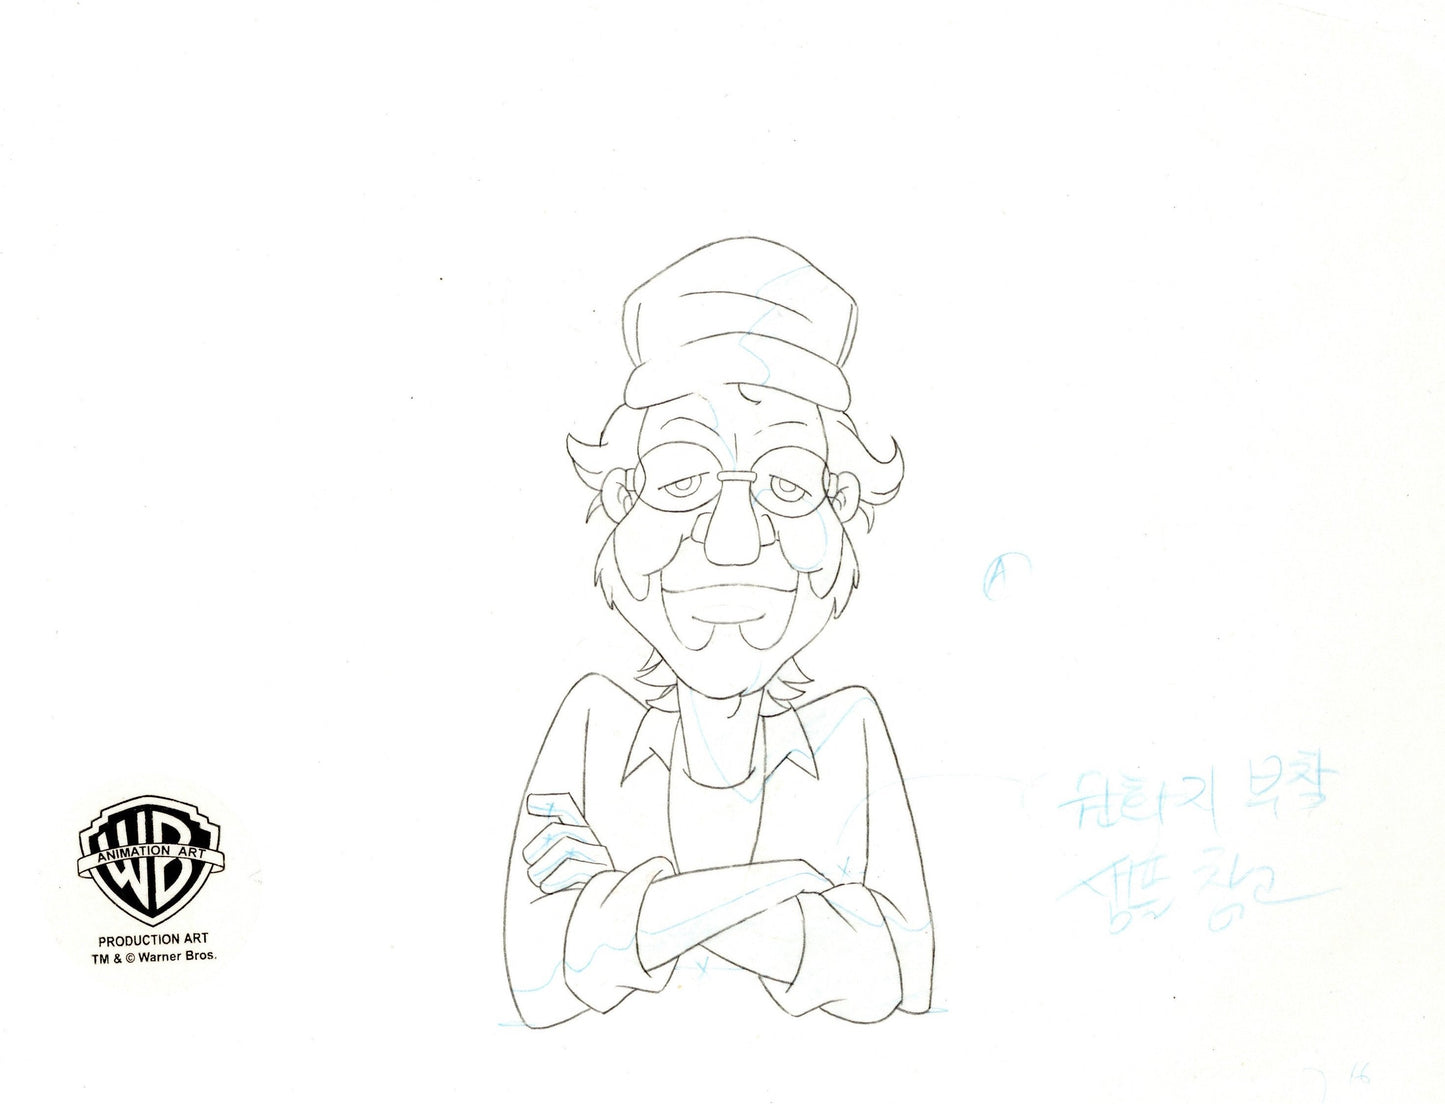 Freakazoid Original Production Cel with Matching Drawing: Steven Spielberg